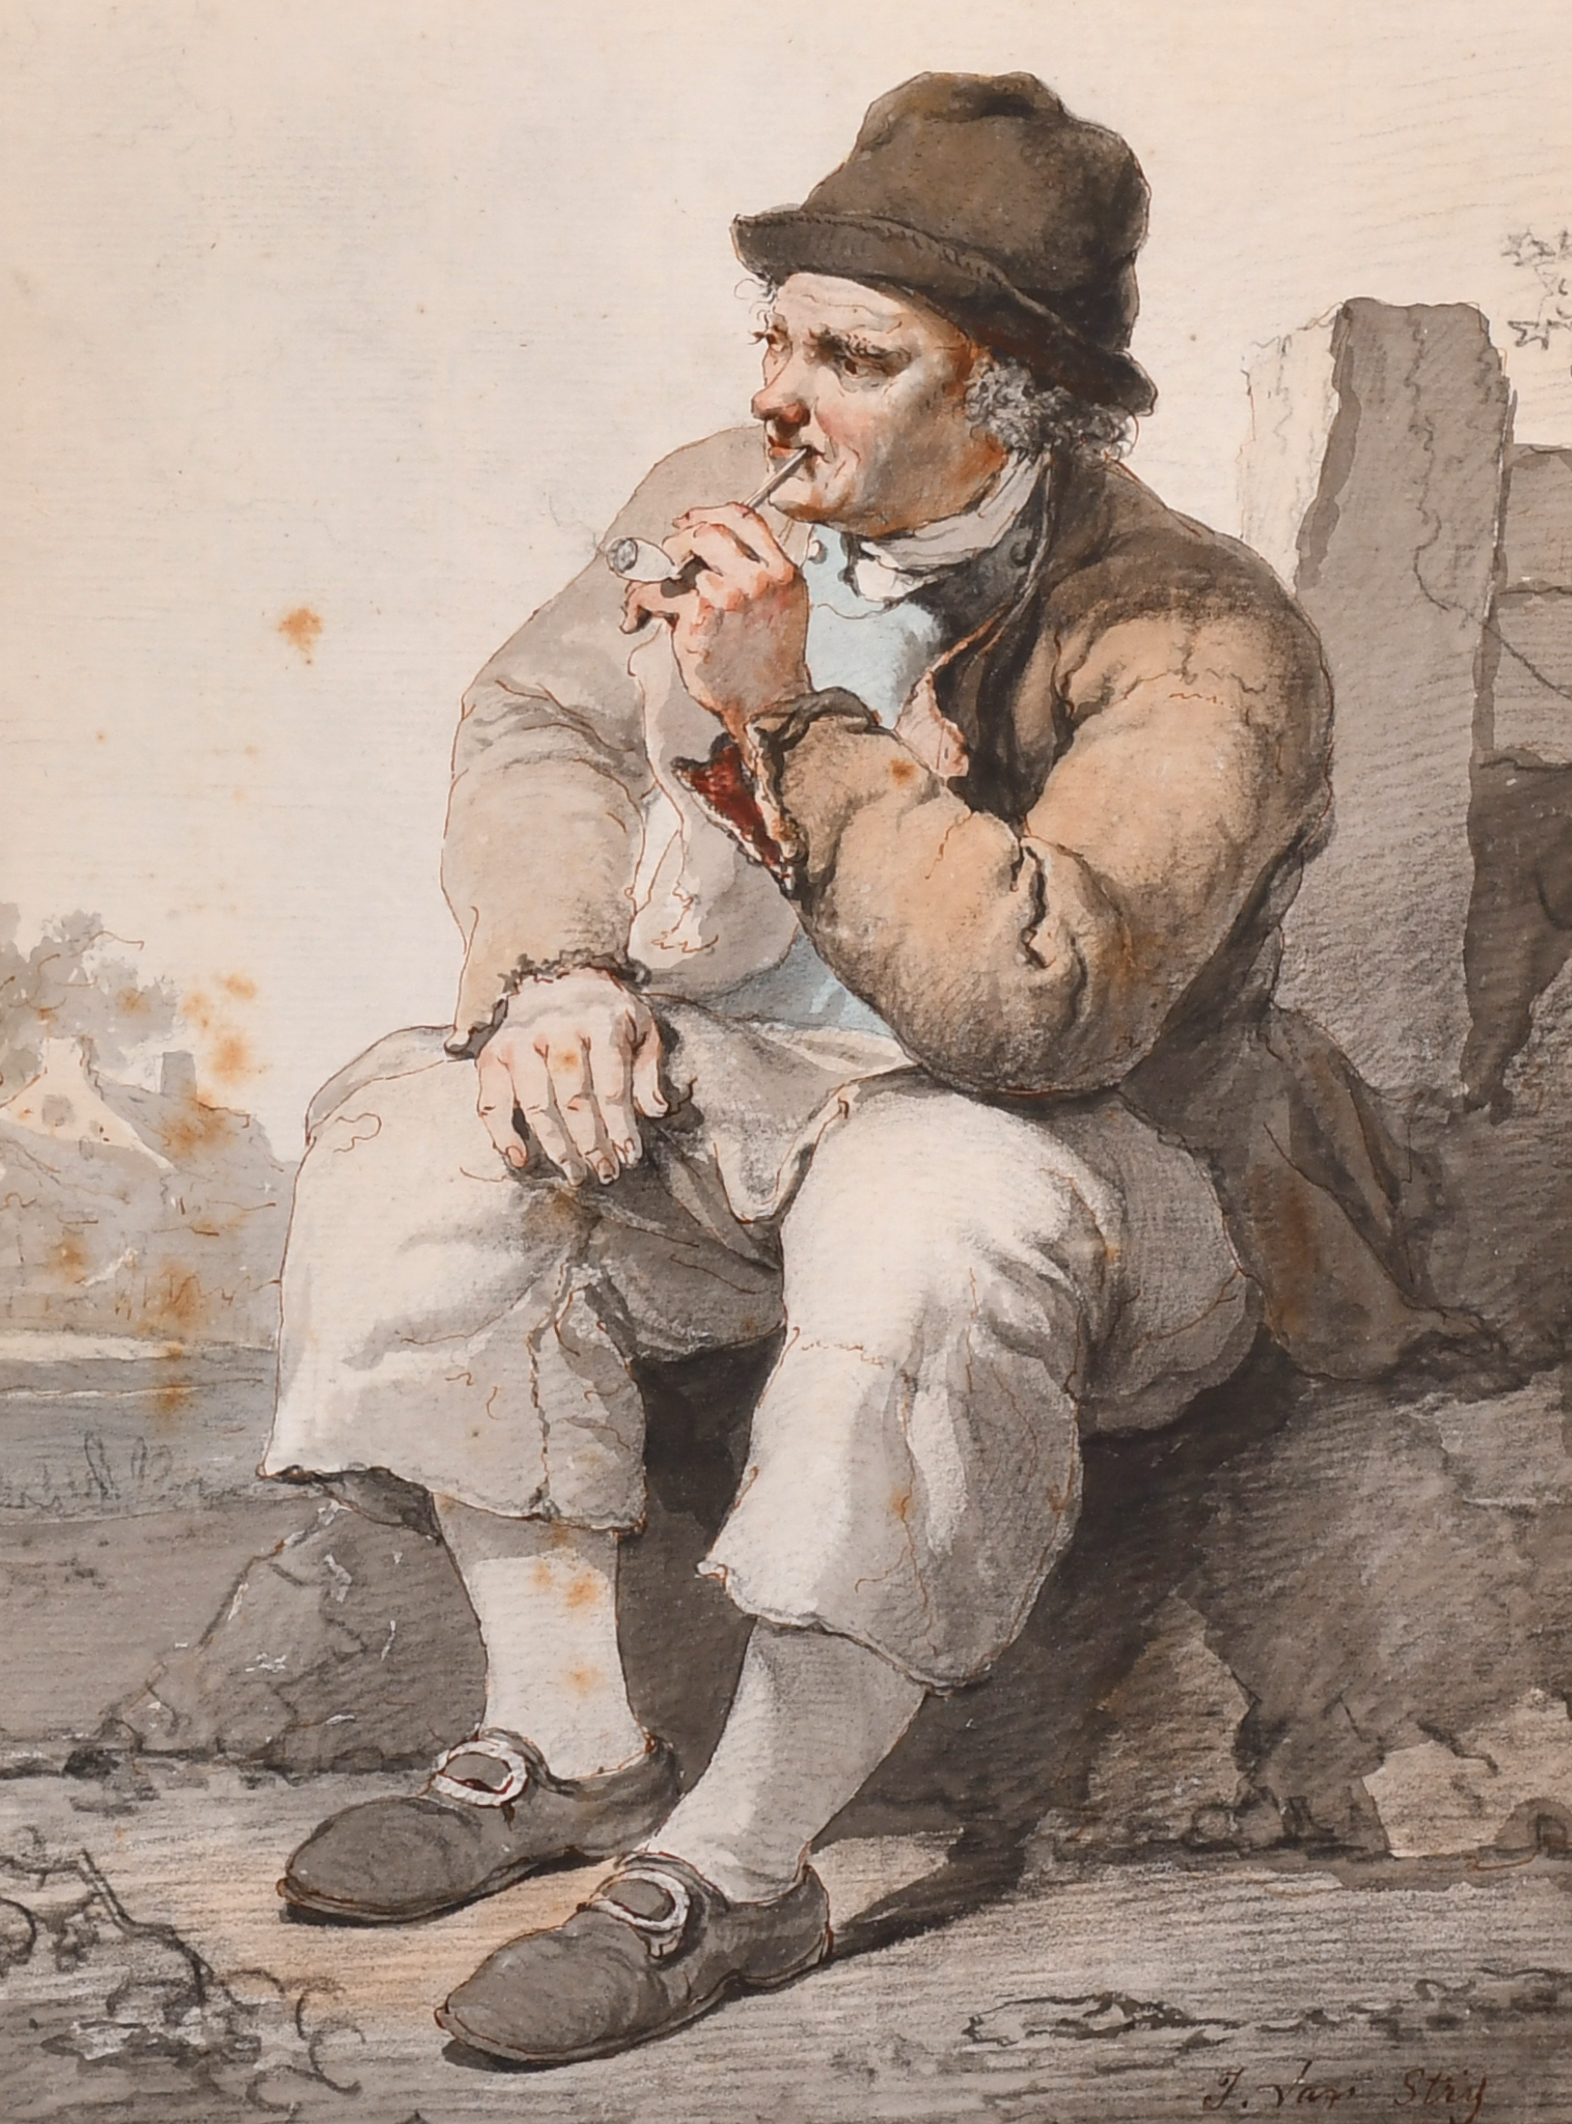 Jacob van Strij (1756-1815) Dutch. Study of a Seated Man smoking a Pipe, Watercolour and Wash,